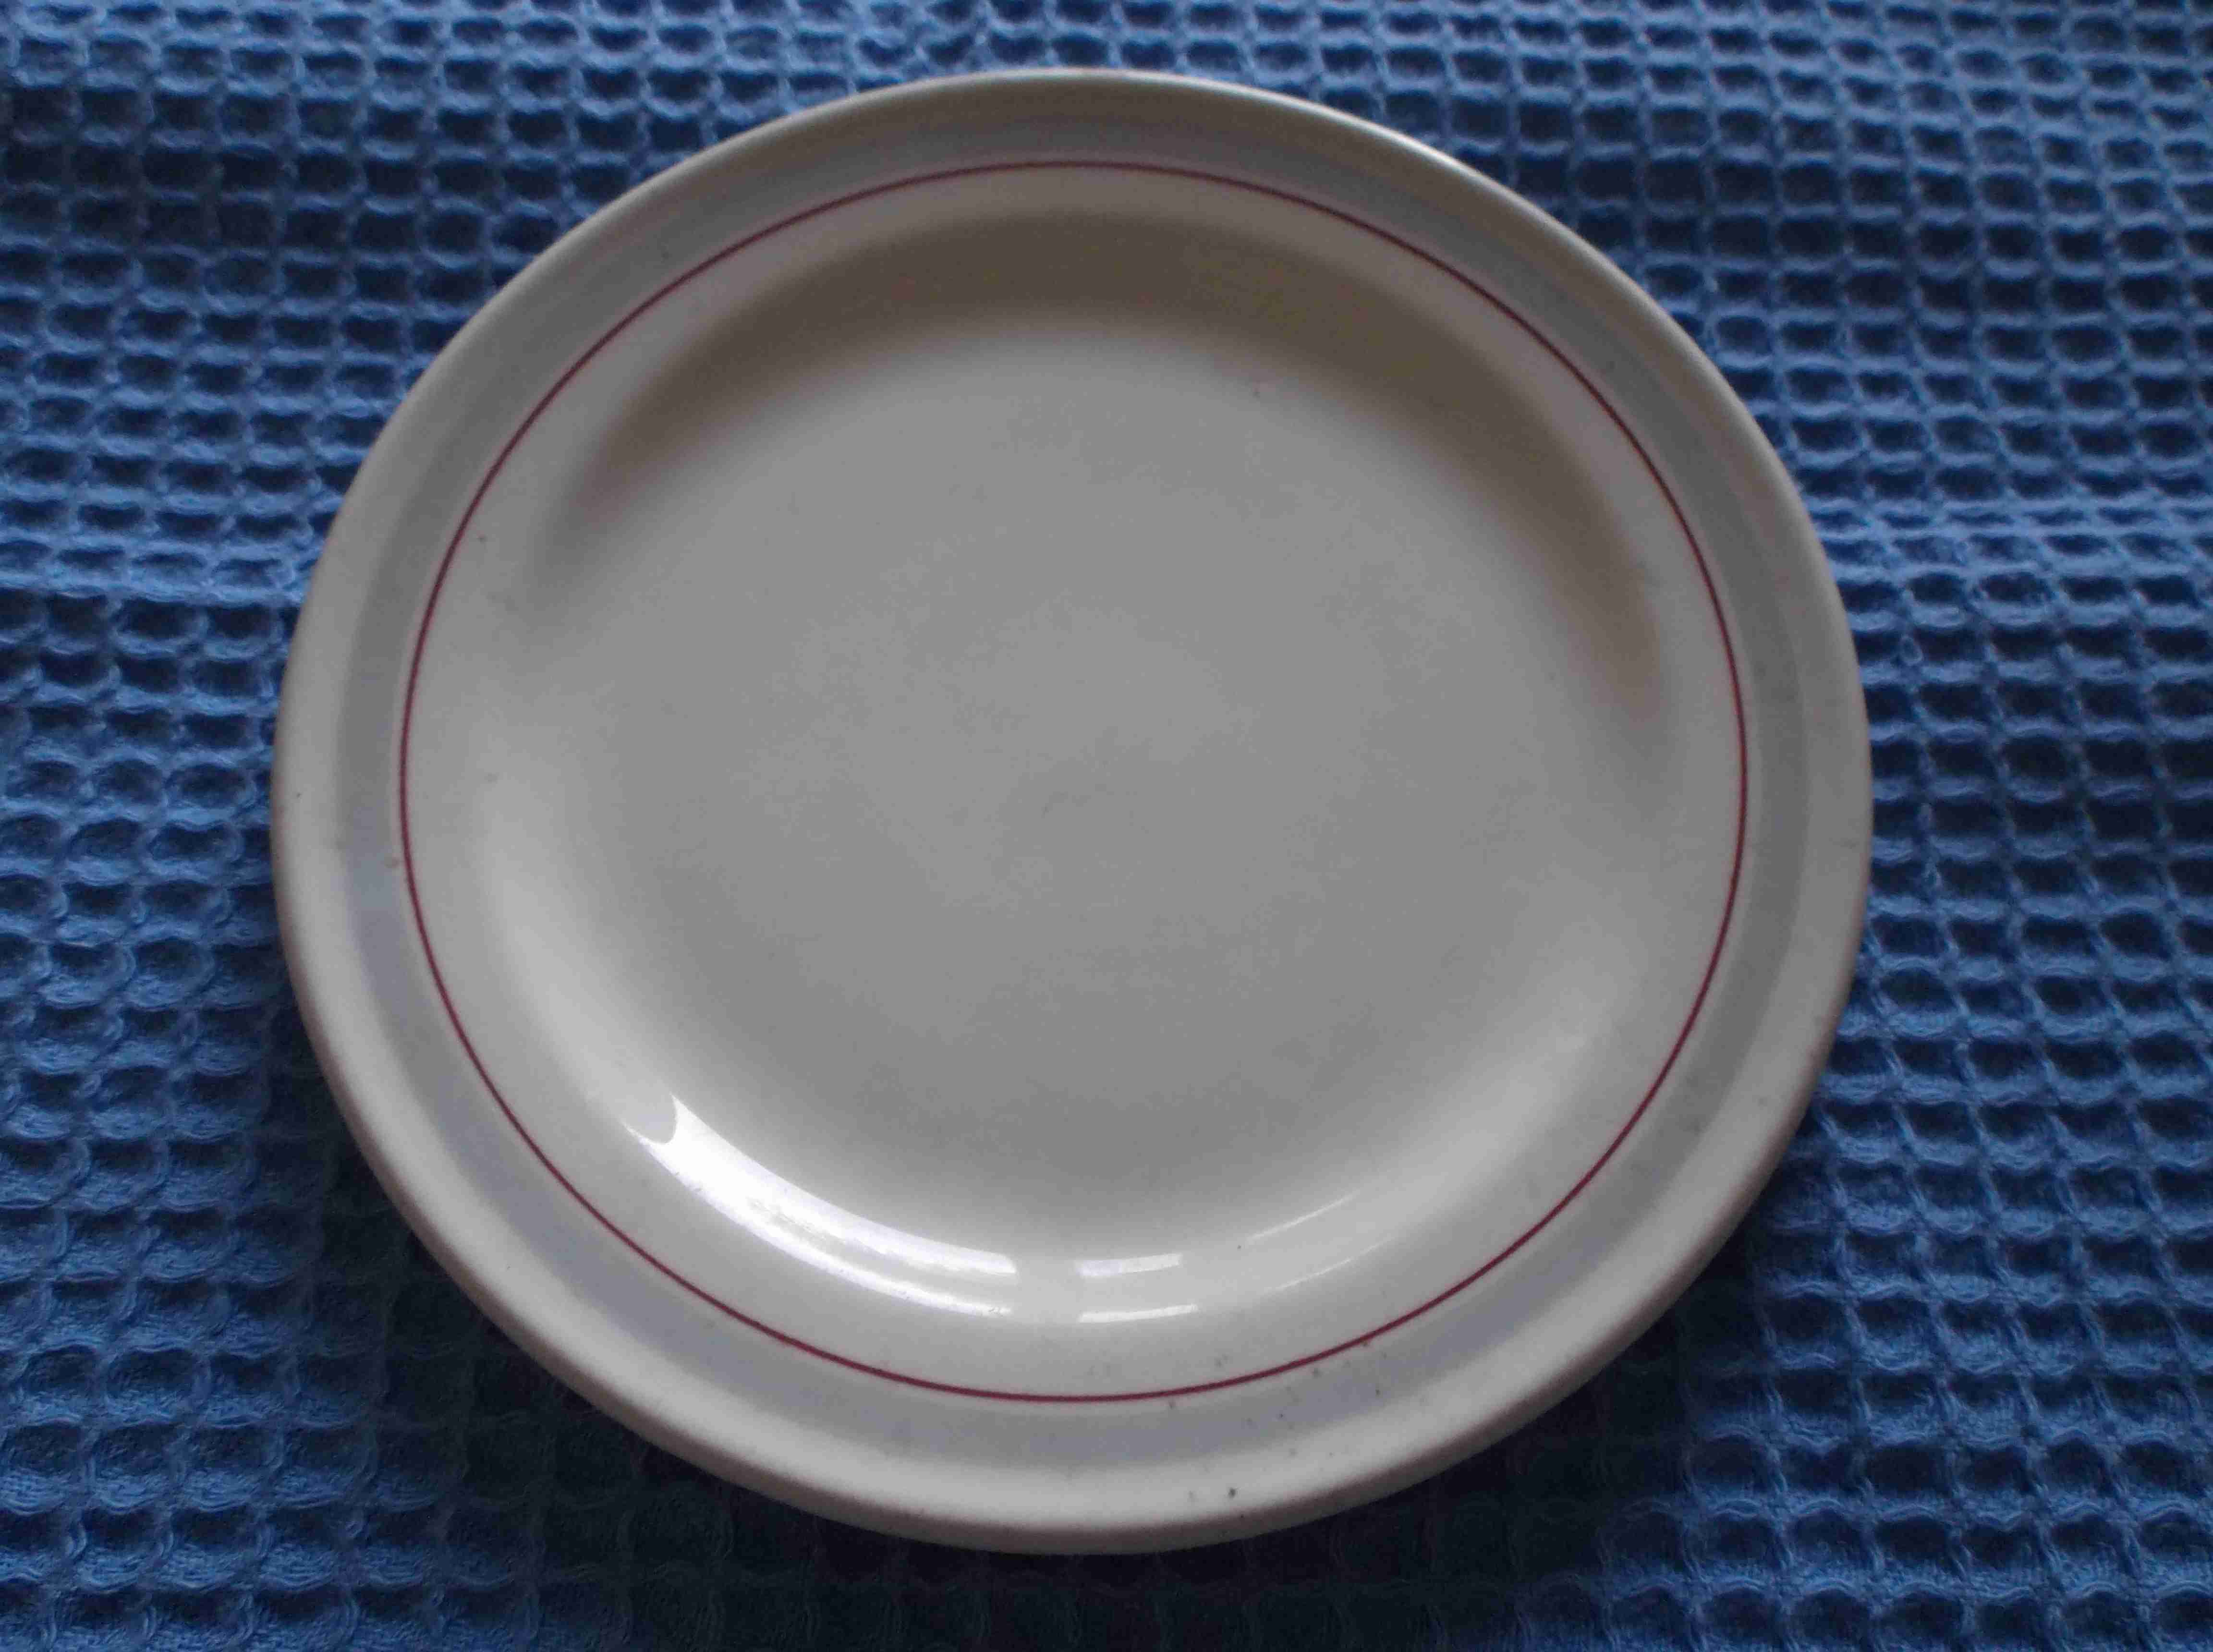 CHINA SIDE PLATE FROM THE CANADIAN PACIFIC STEAMSHIP COMPANY